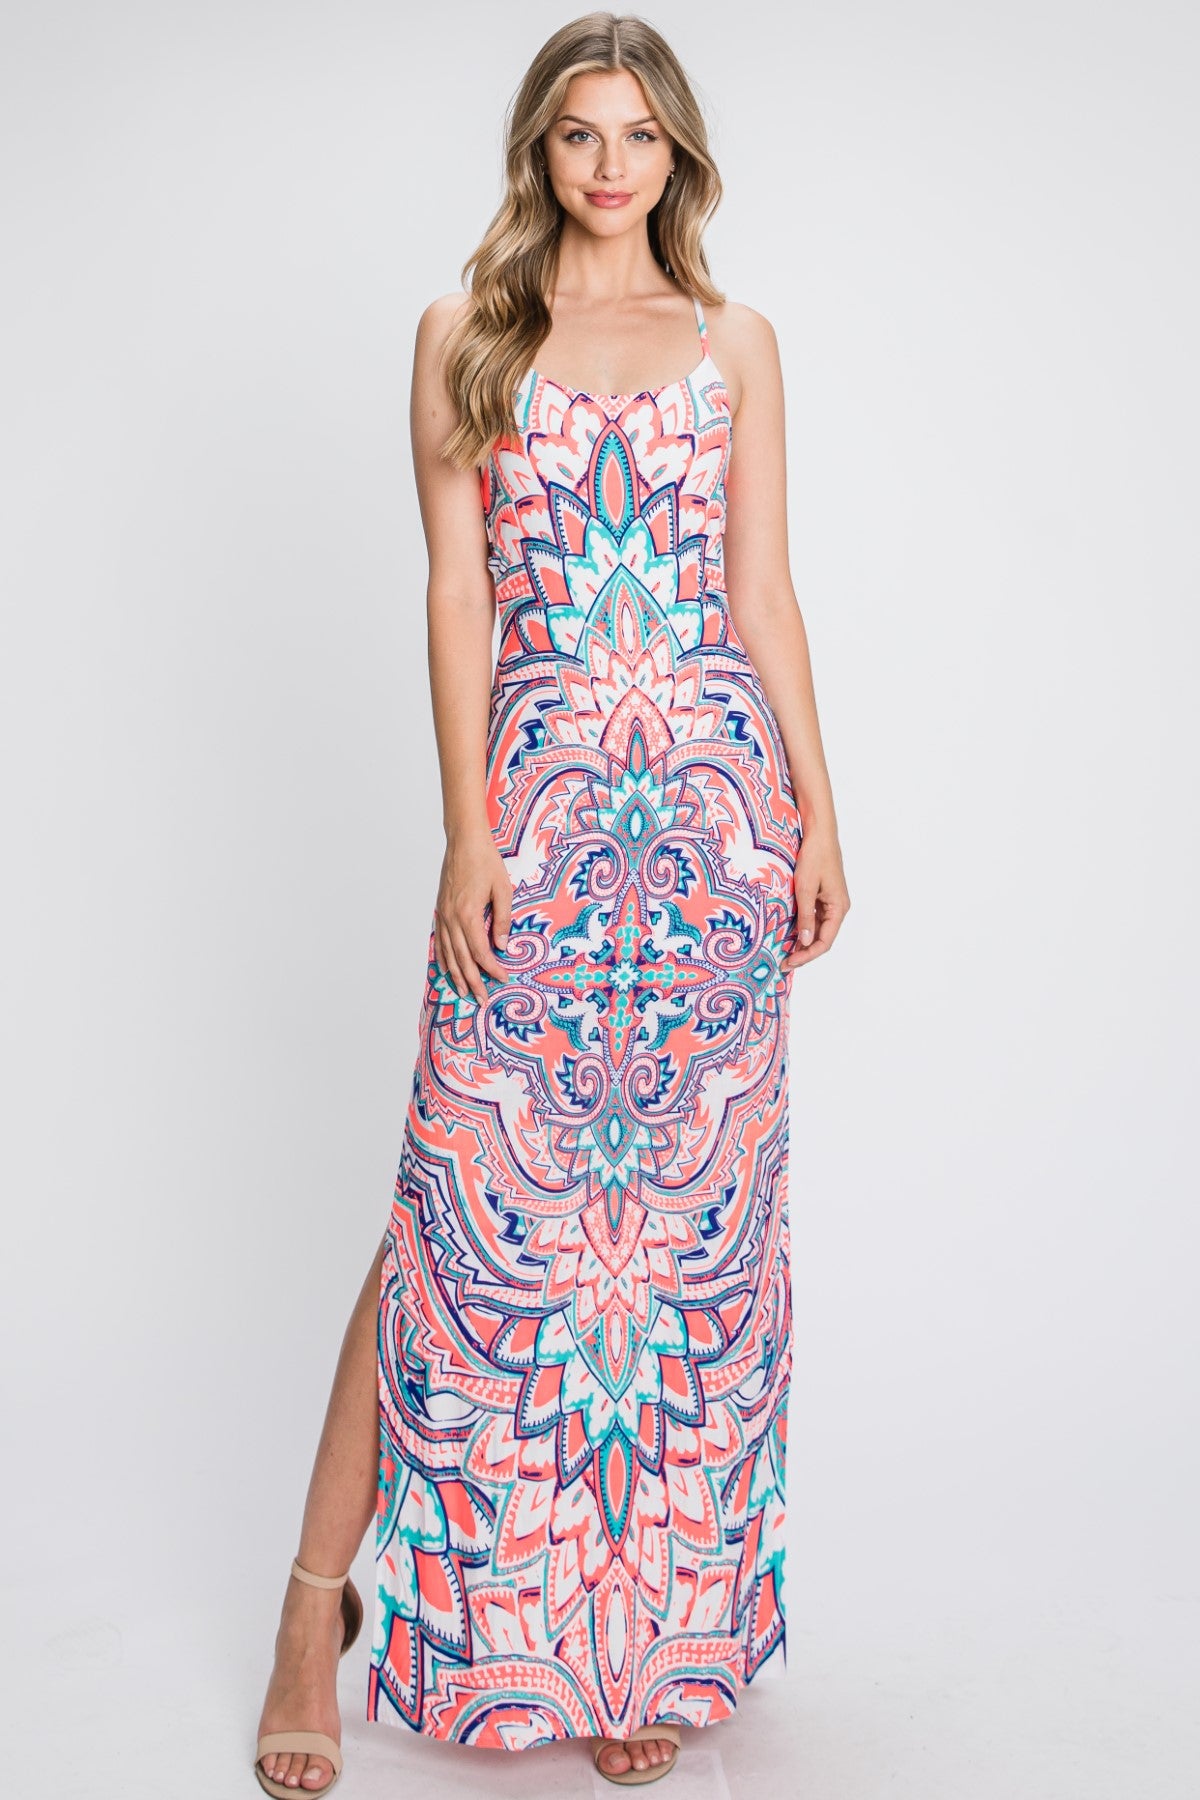 Criss Cross Strappy Back With Abstract Design Maxi Dress